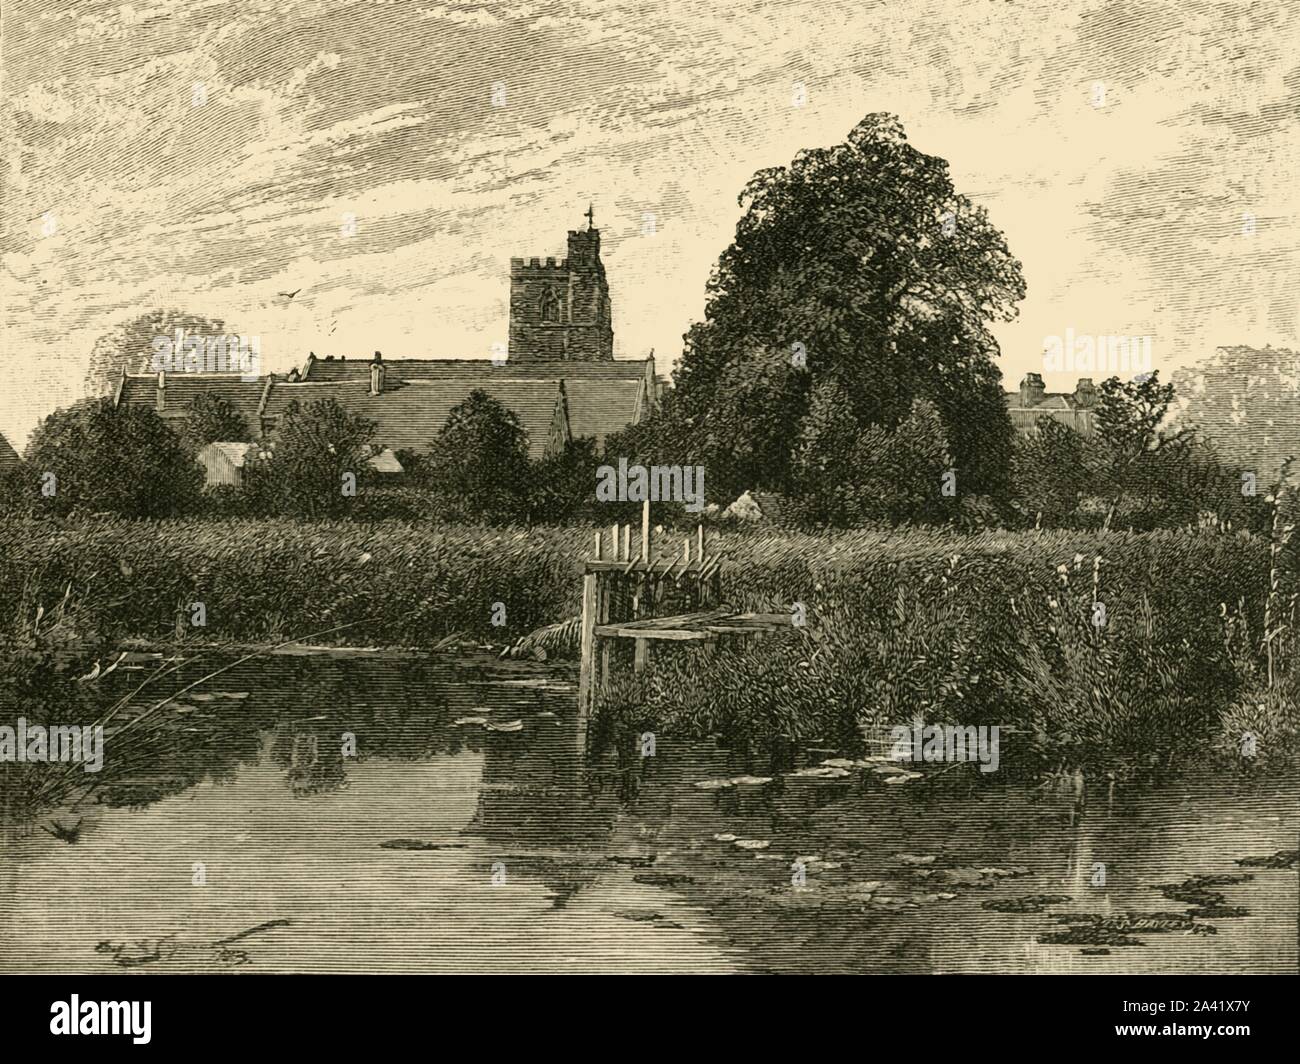 'Bray Church', 1898. St Michael's Church on the banks of the river Thames at Bray in Berkshire was built in 1293.  From &quot;Our Own Country, Volume VI&quot;. [Cassell and Company, Limited, London, Paris &amp; Melbourne, 1898] Stock Photo